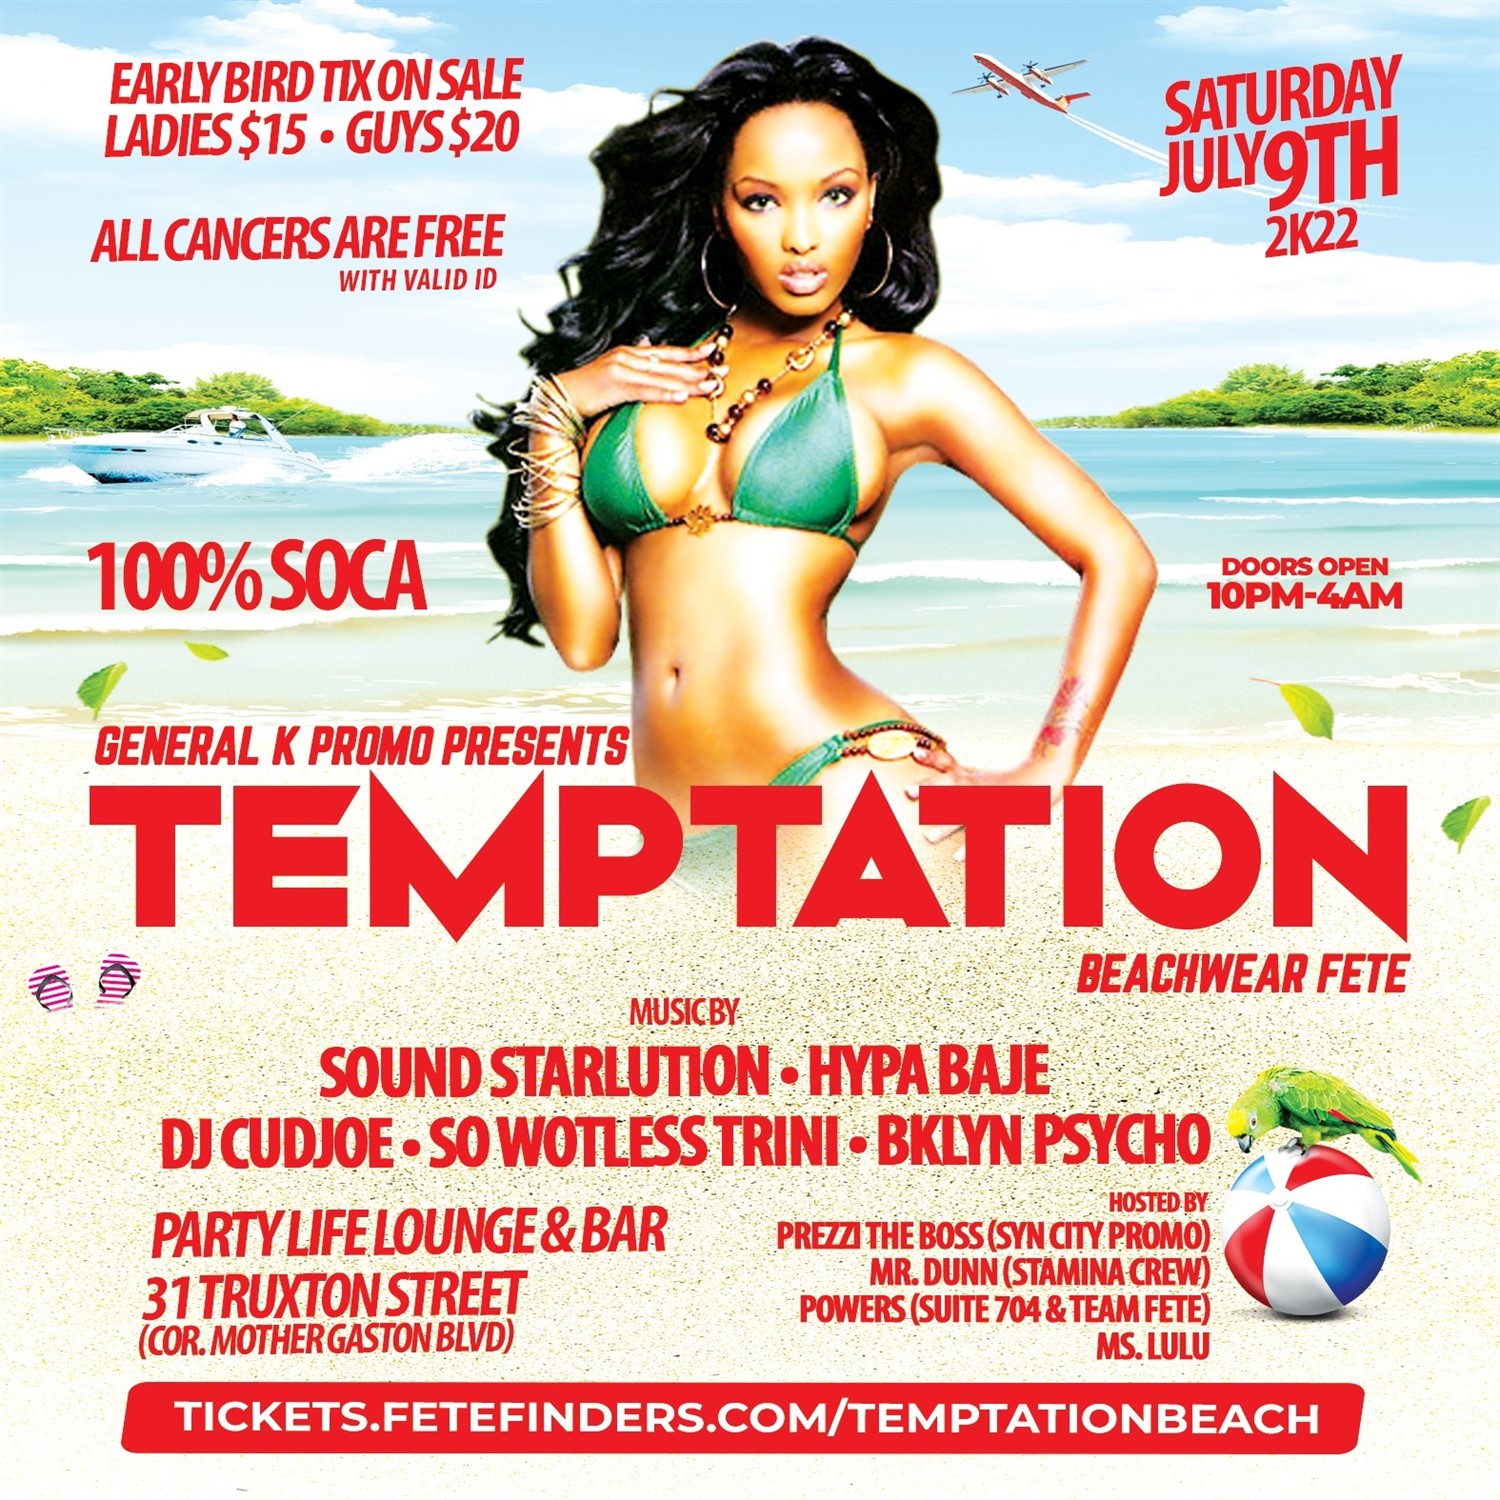 Temptation: Beachwear Fete  on Jul 09, 22:00@Party Life Lounge and Bar - Buy tickets and Get information on www.fetefinders.com tickets.fetefinders.com